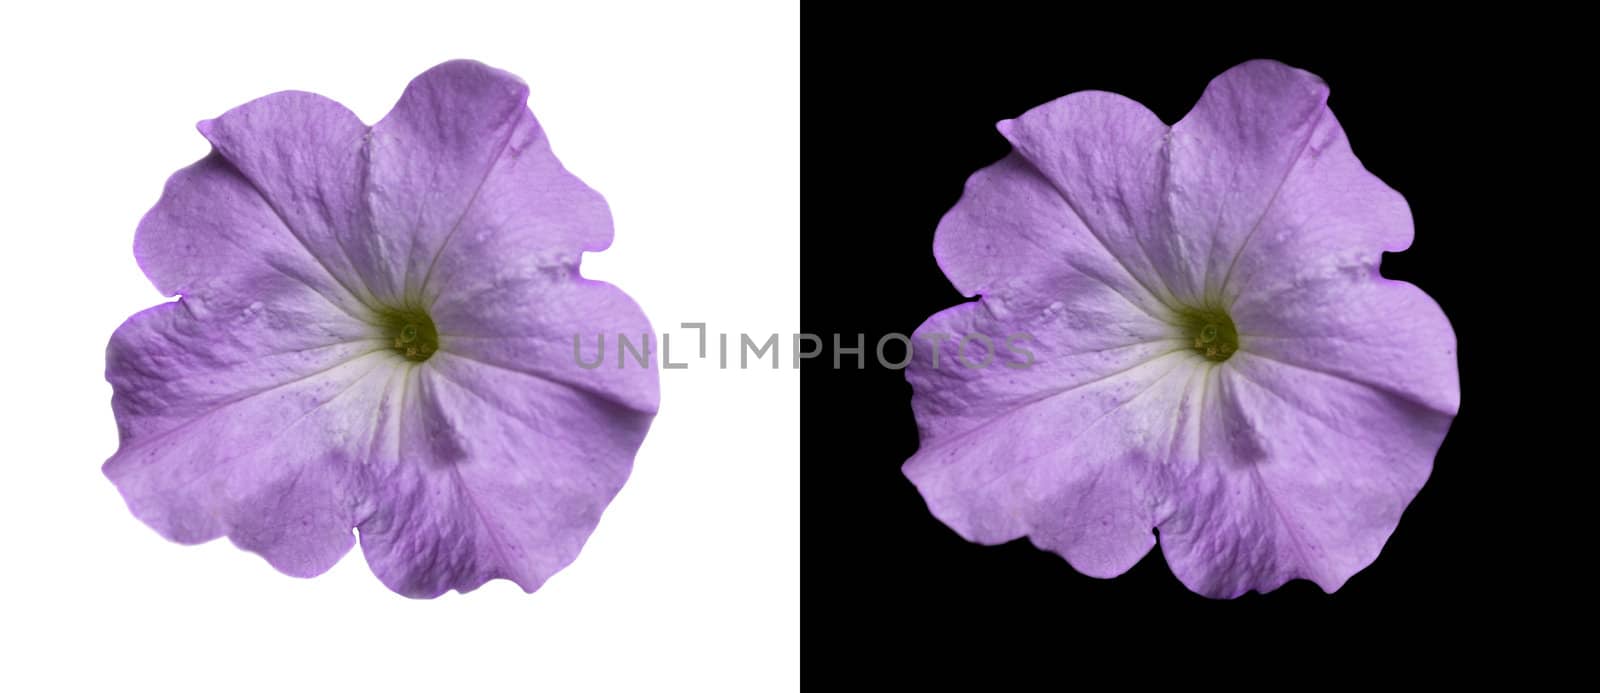 lilac purple flower violet petunia over black and white by sherj